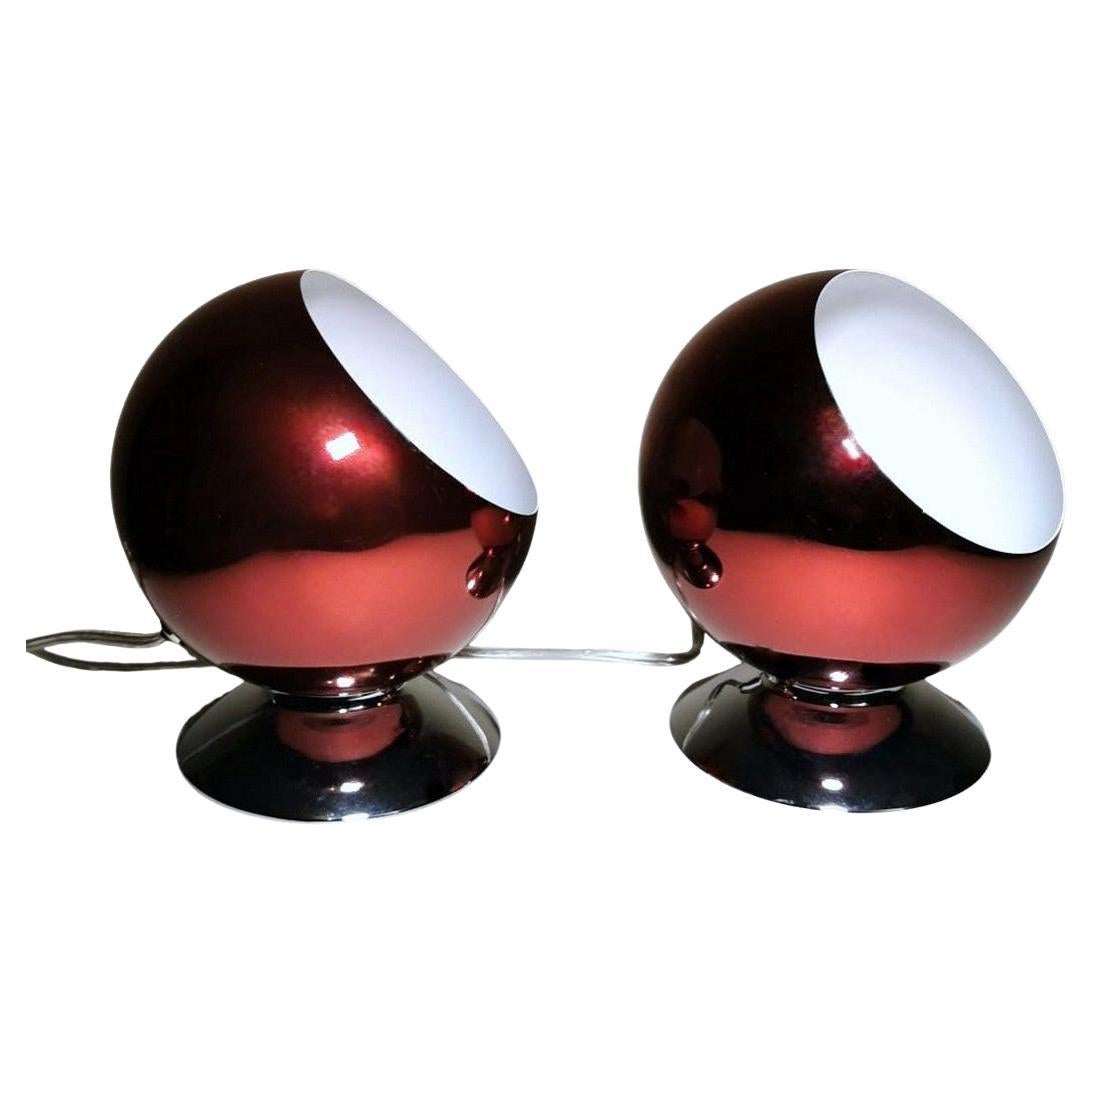 Space Age Design Eye Ball Gepo Pair of Dutch Colored Aluminum Abat-Jour For Sale